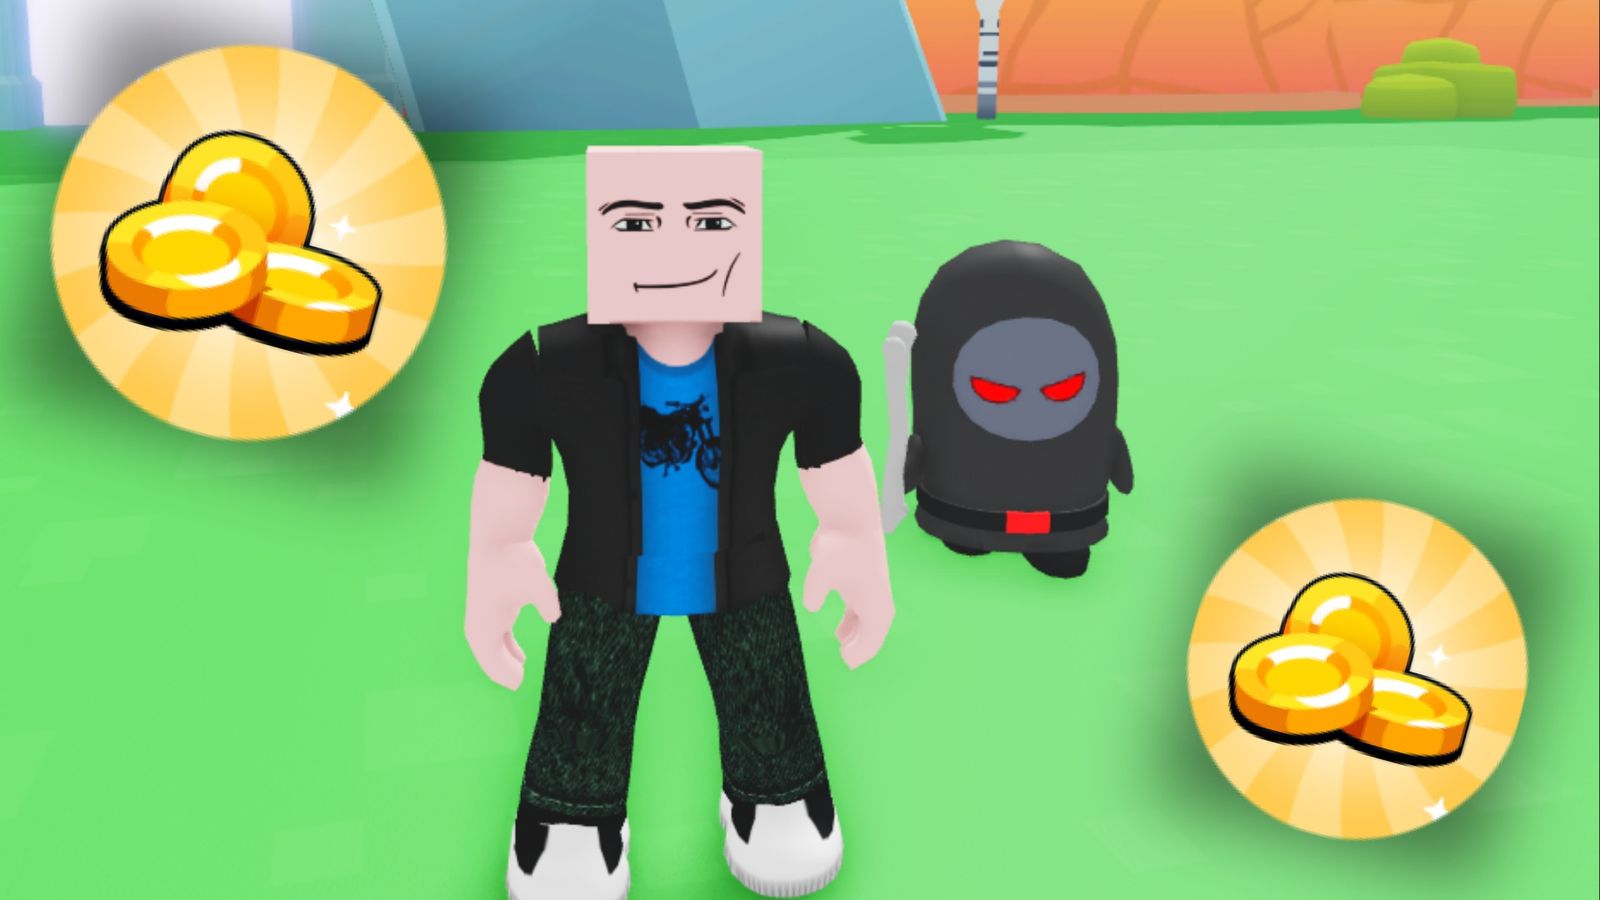 Roblox character in Blub Defense with coin icons floating nearby